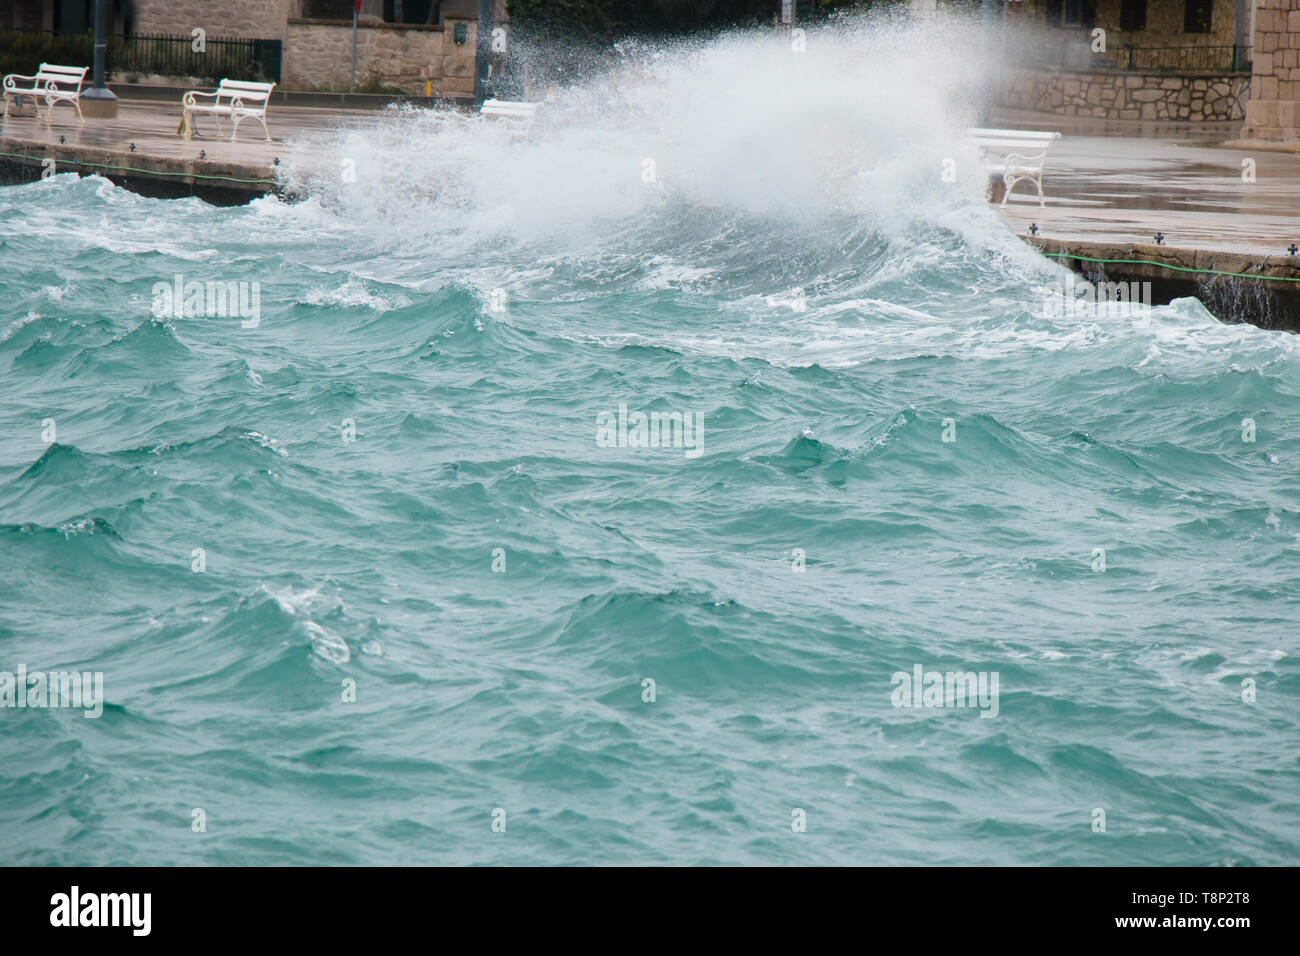 Stormy sea splashing the waves on coast promenade with benches in Dalmatia seaside town in off season during strong south wind with rain Stock Photo